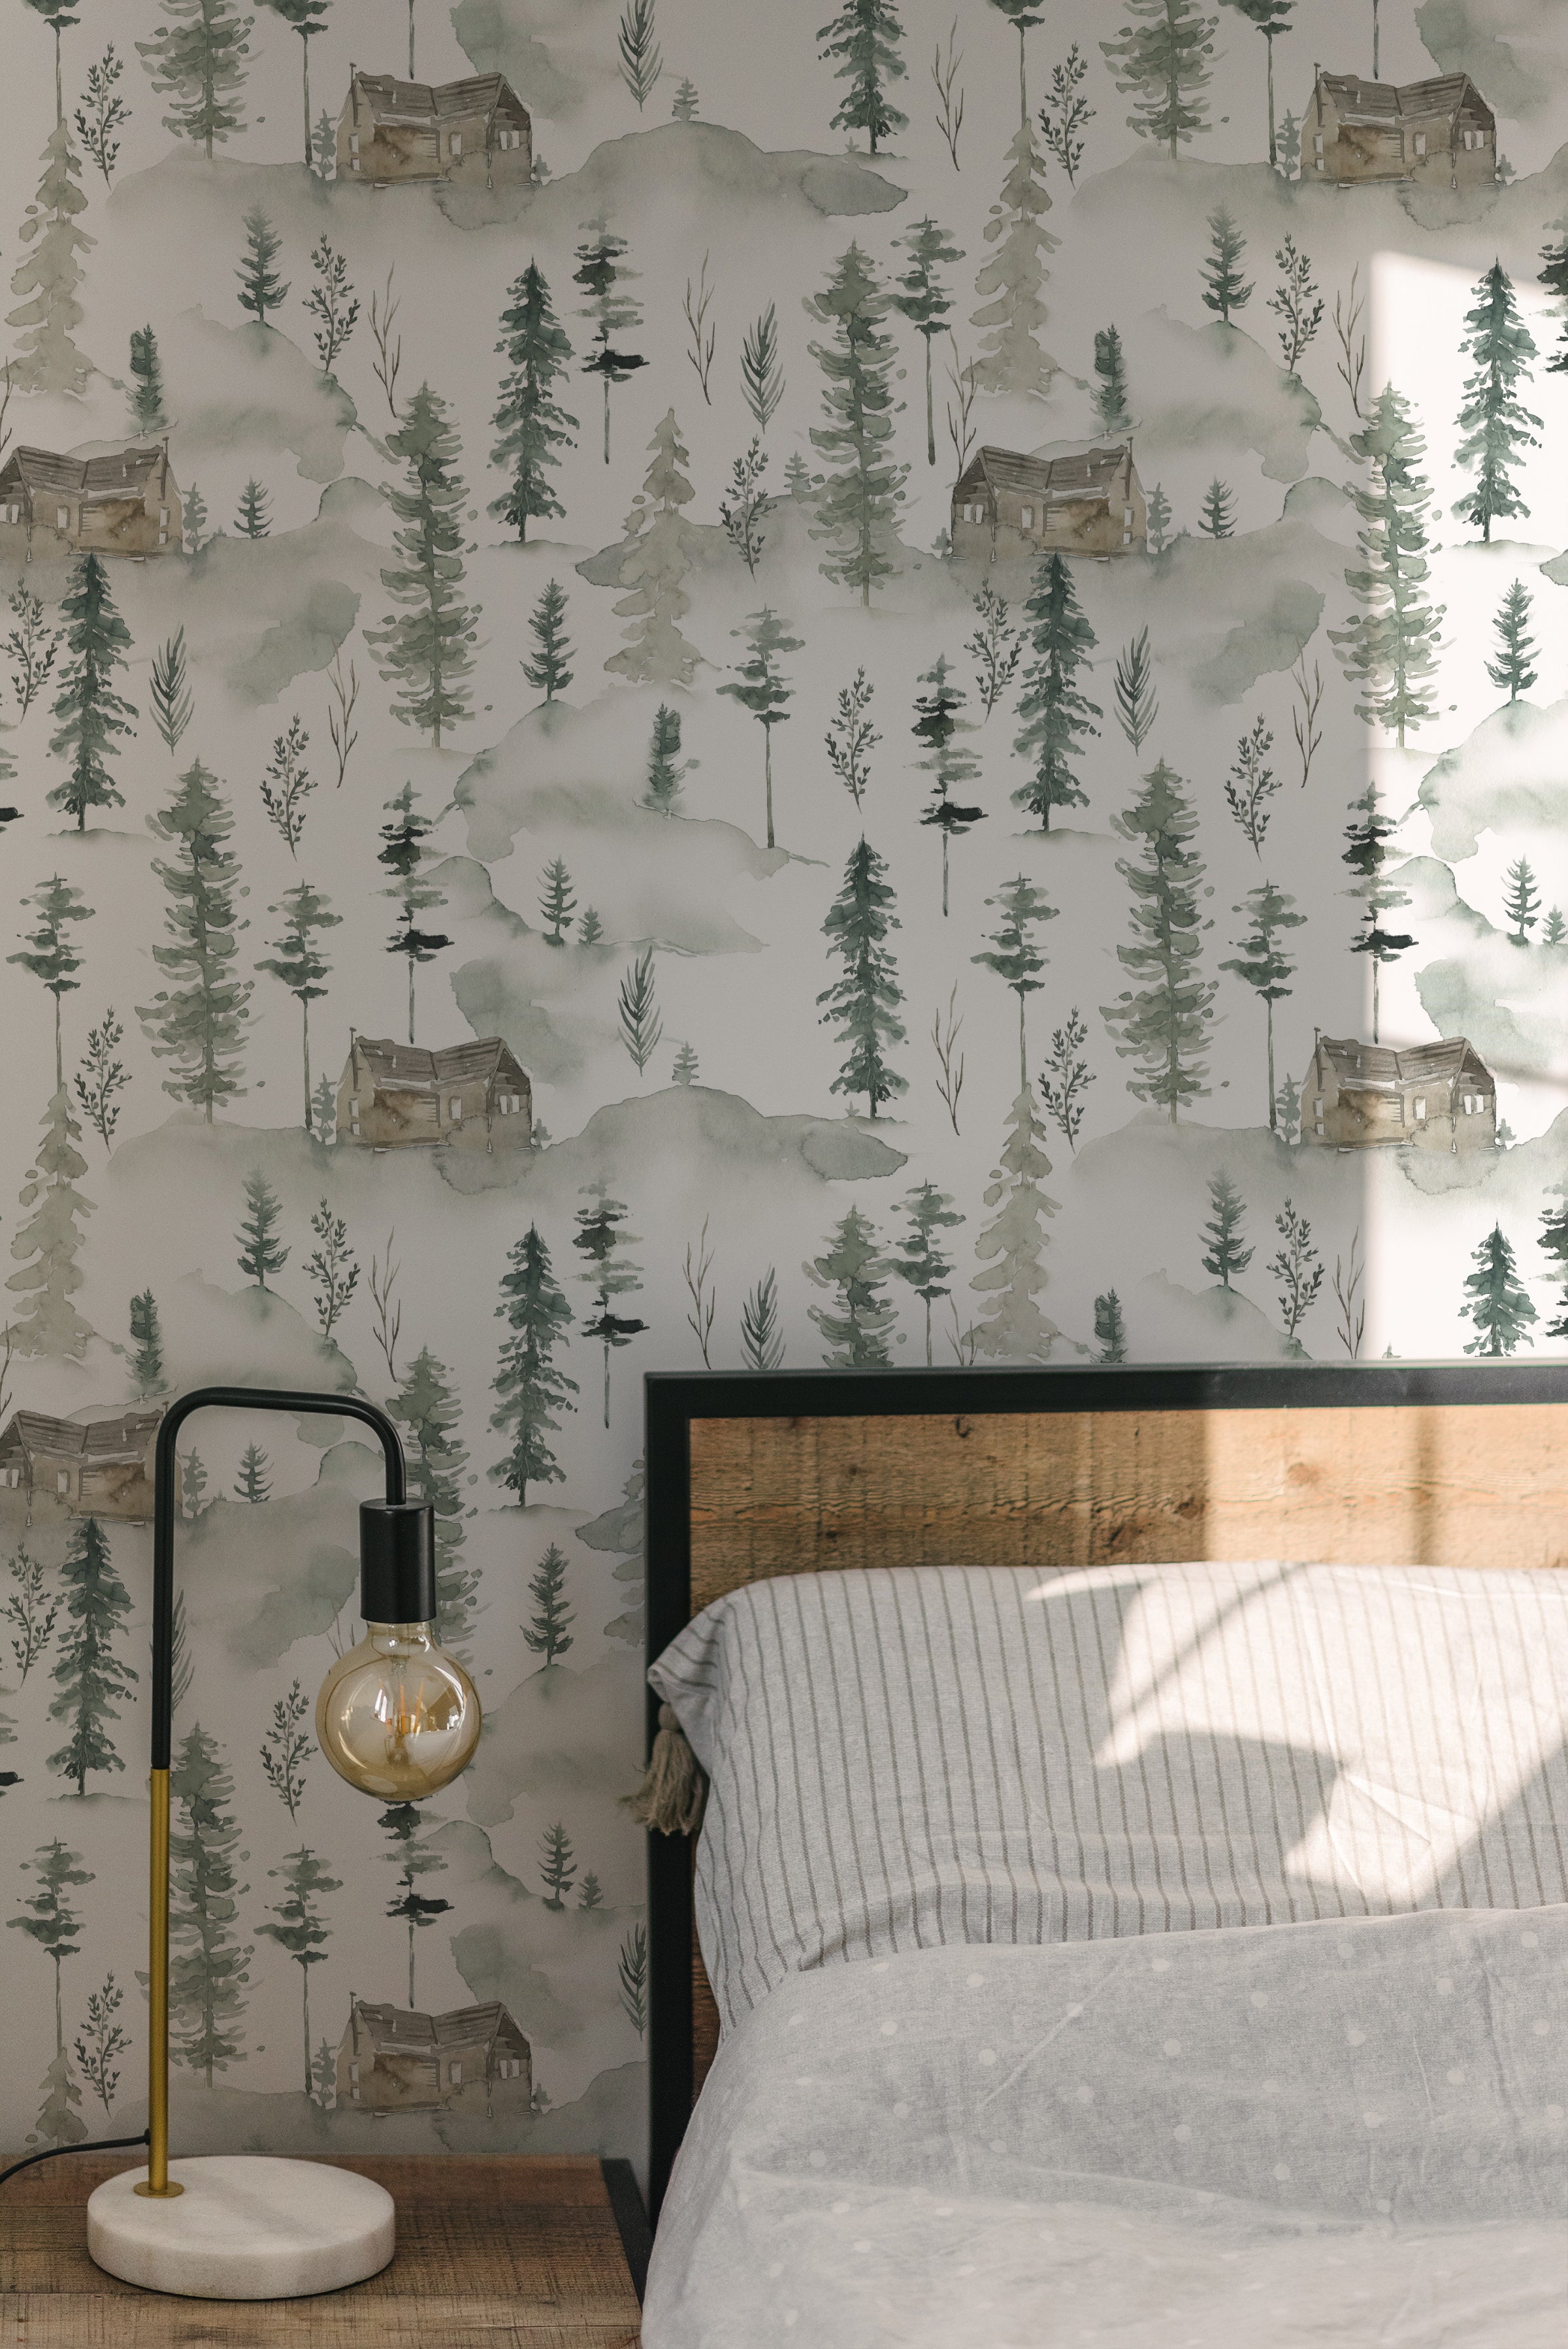 Bedroom interior showcasing In the Woods Wallpaper, creating a peaceful backdrop with its delicate forest and cabin motifs. The room includes a simple bed with striped bedding and a stylish bedside lamp, complementing the natural theme